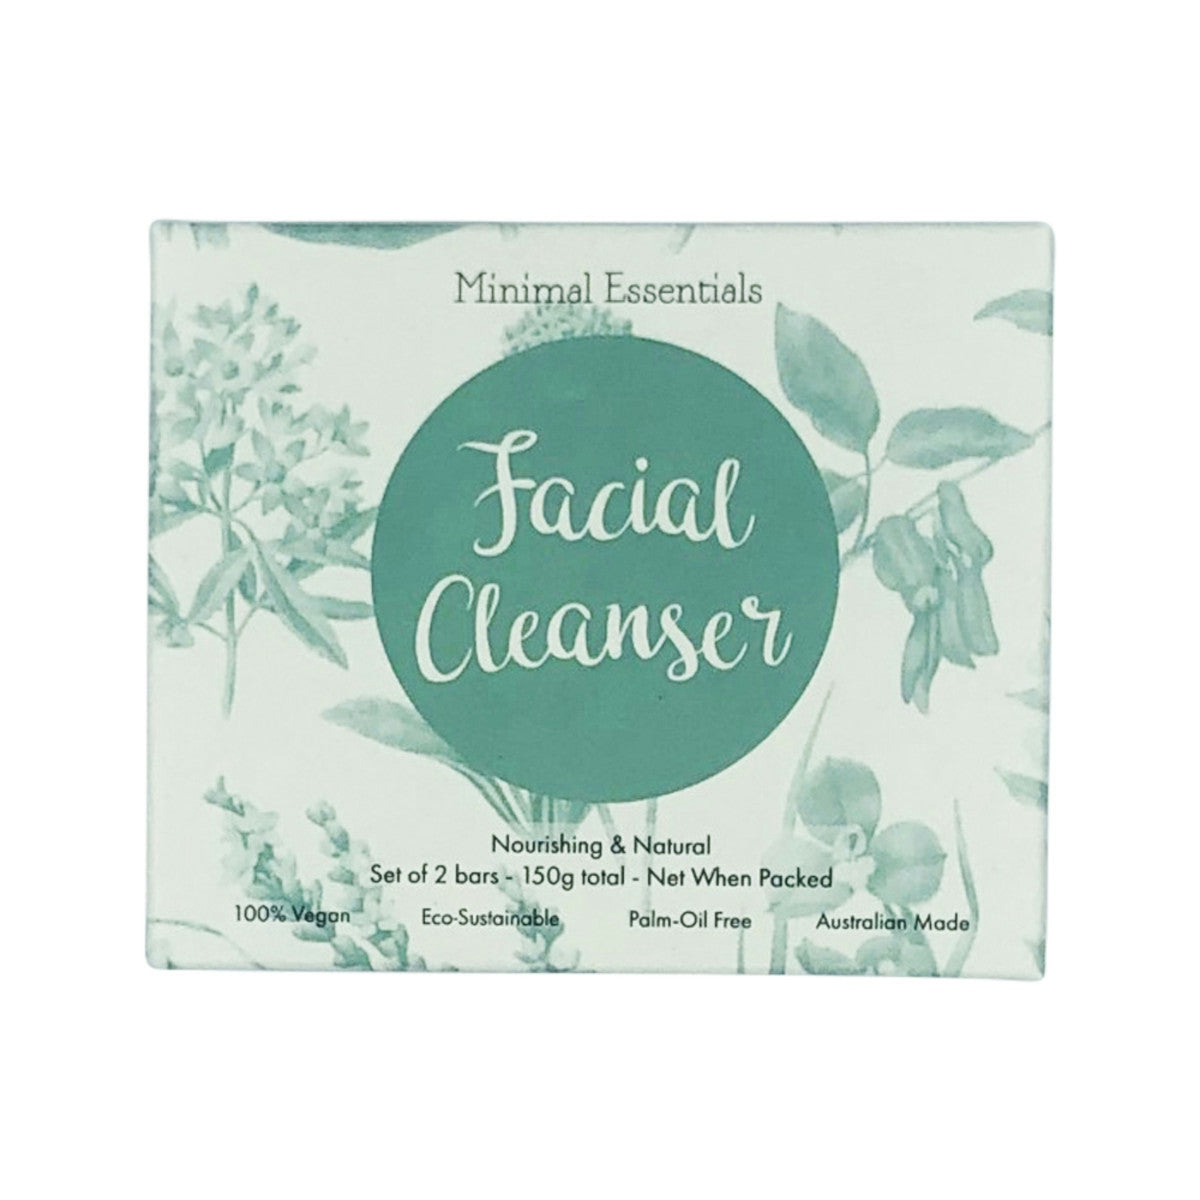 image of Minimal Essentials Facial Cleansing Bar Nourishing & Natural (2 Pack) with white background 